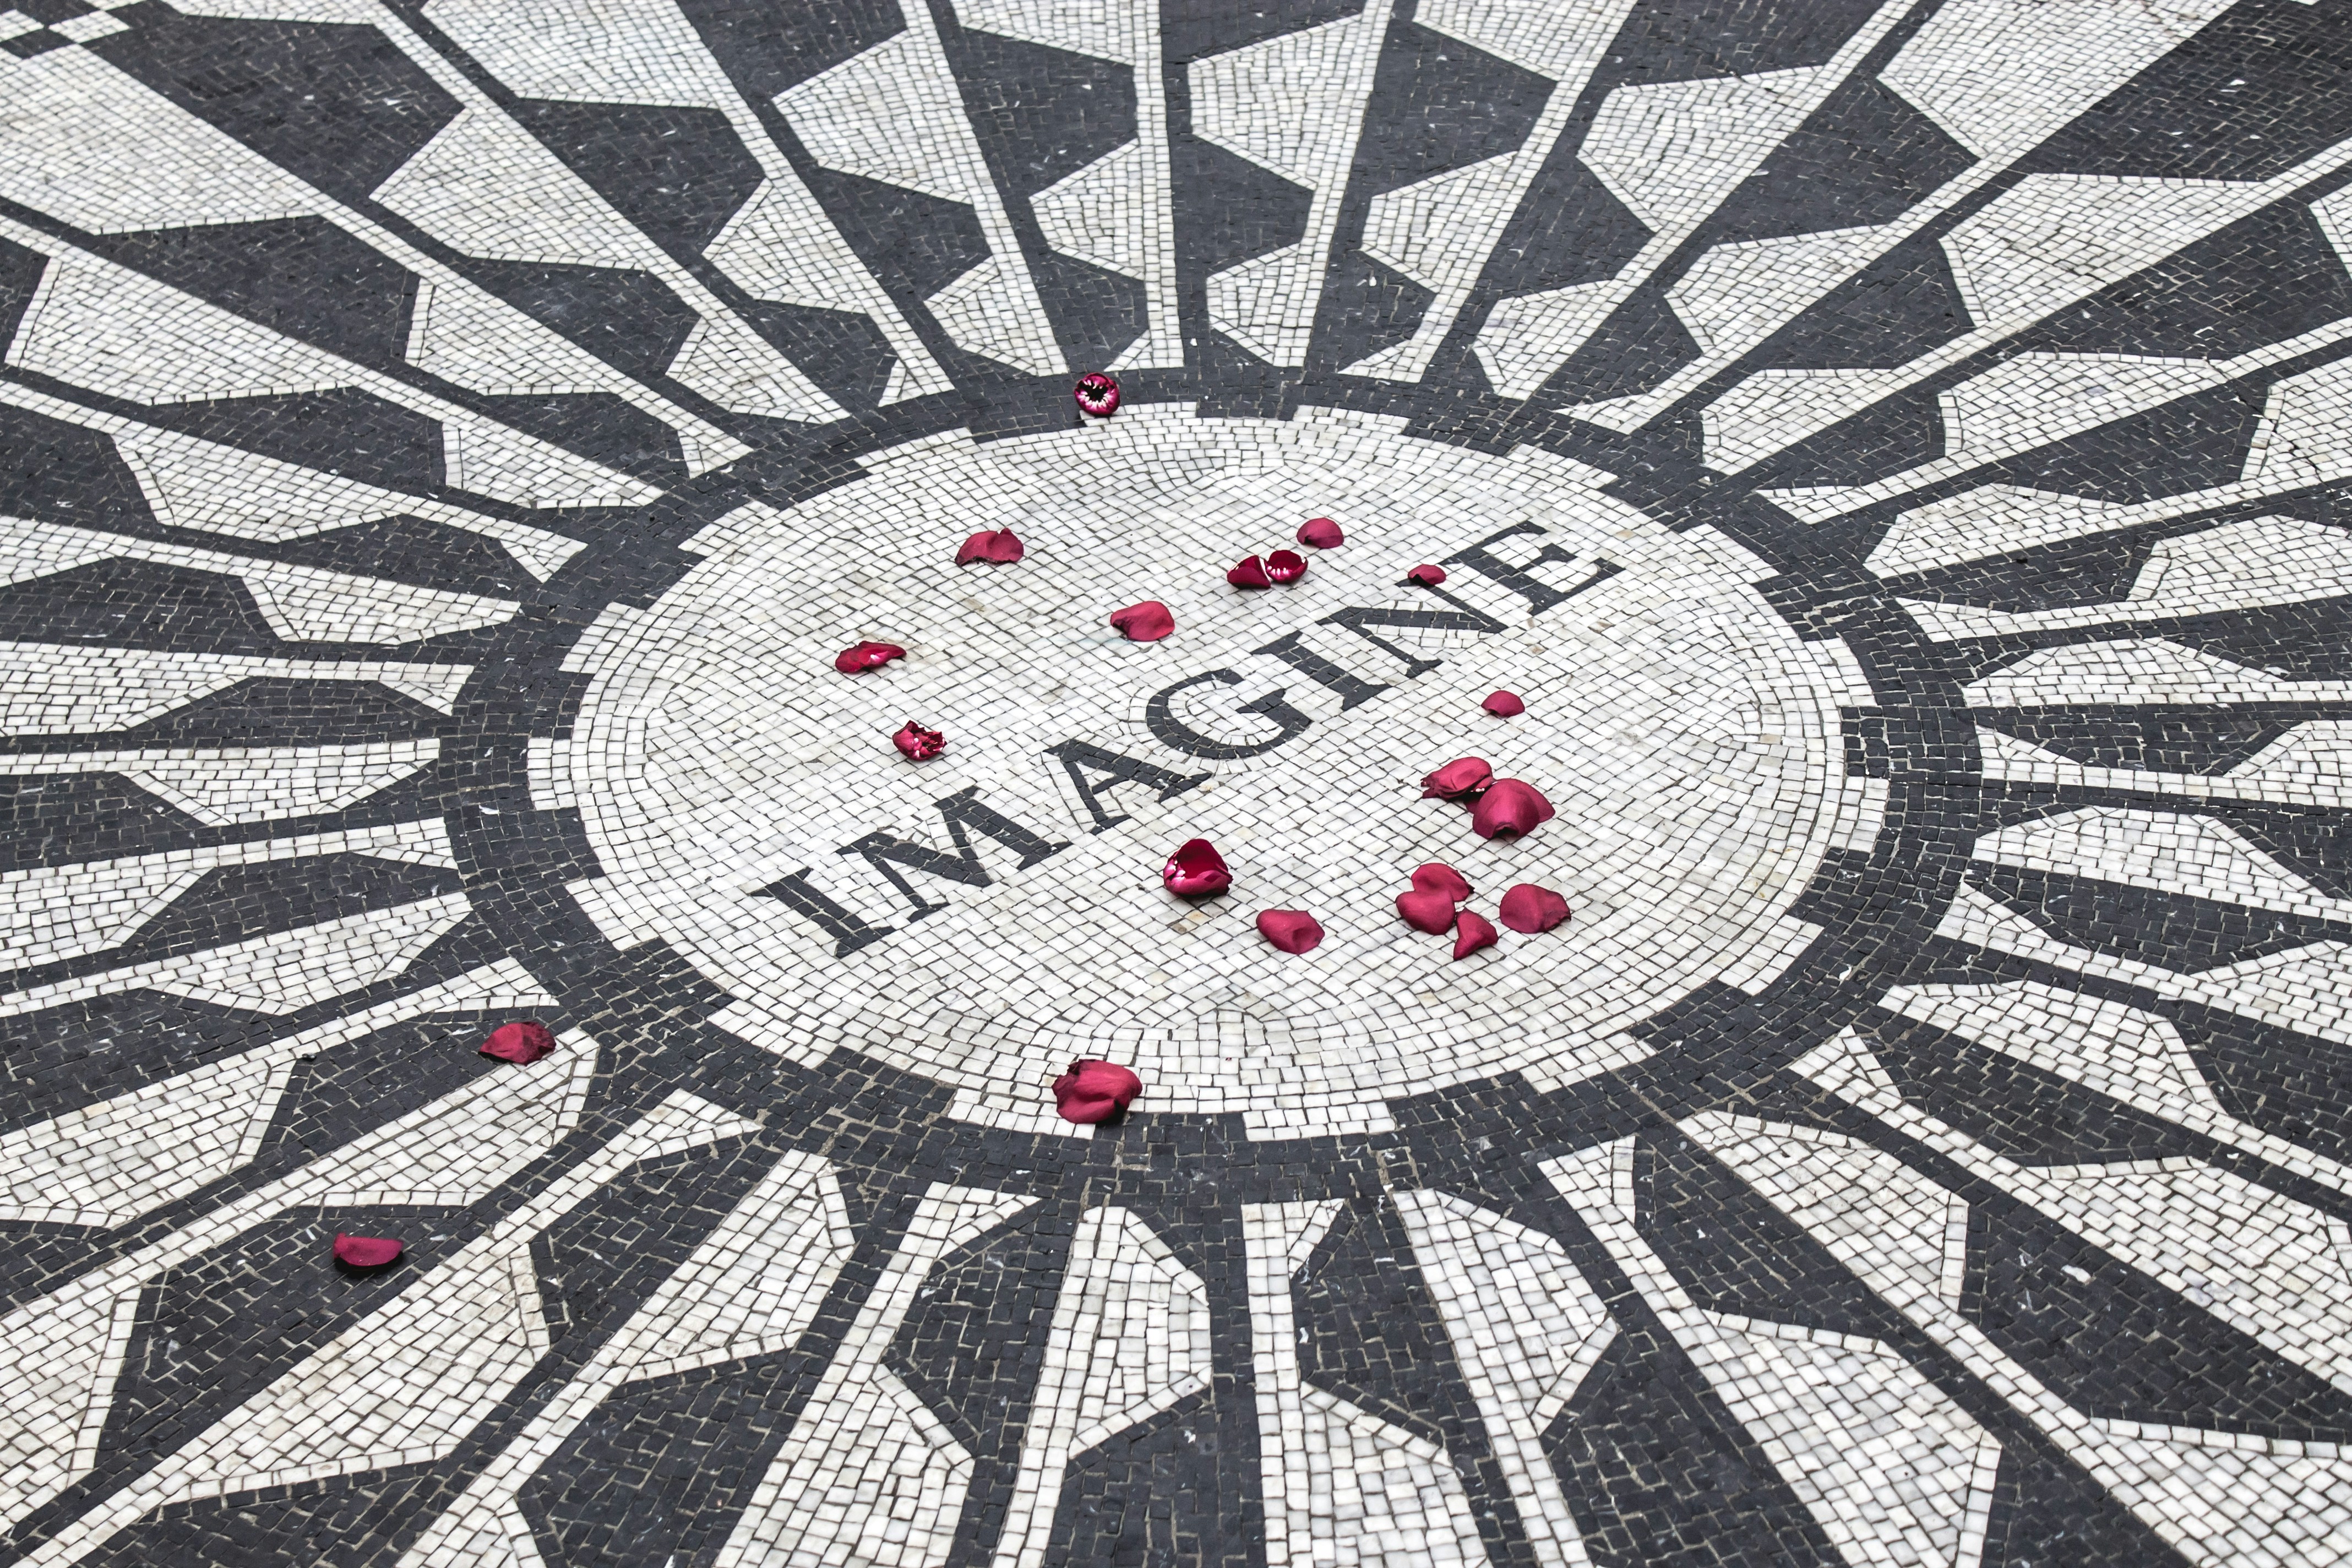 This is the John Lennon memorial in Strawberry Fields, New York. Someone left rose petals before we arrived.